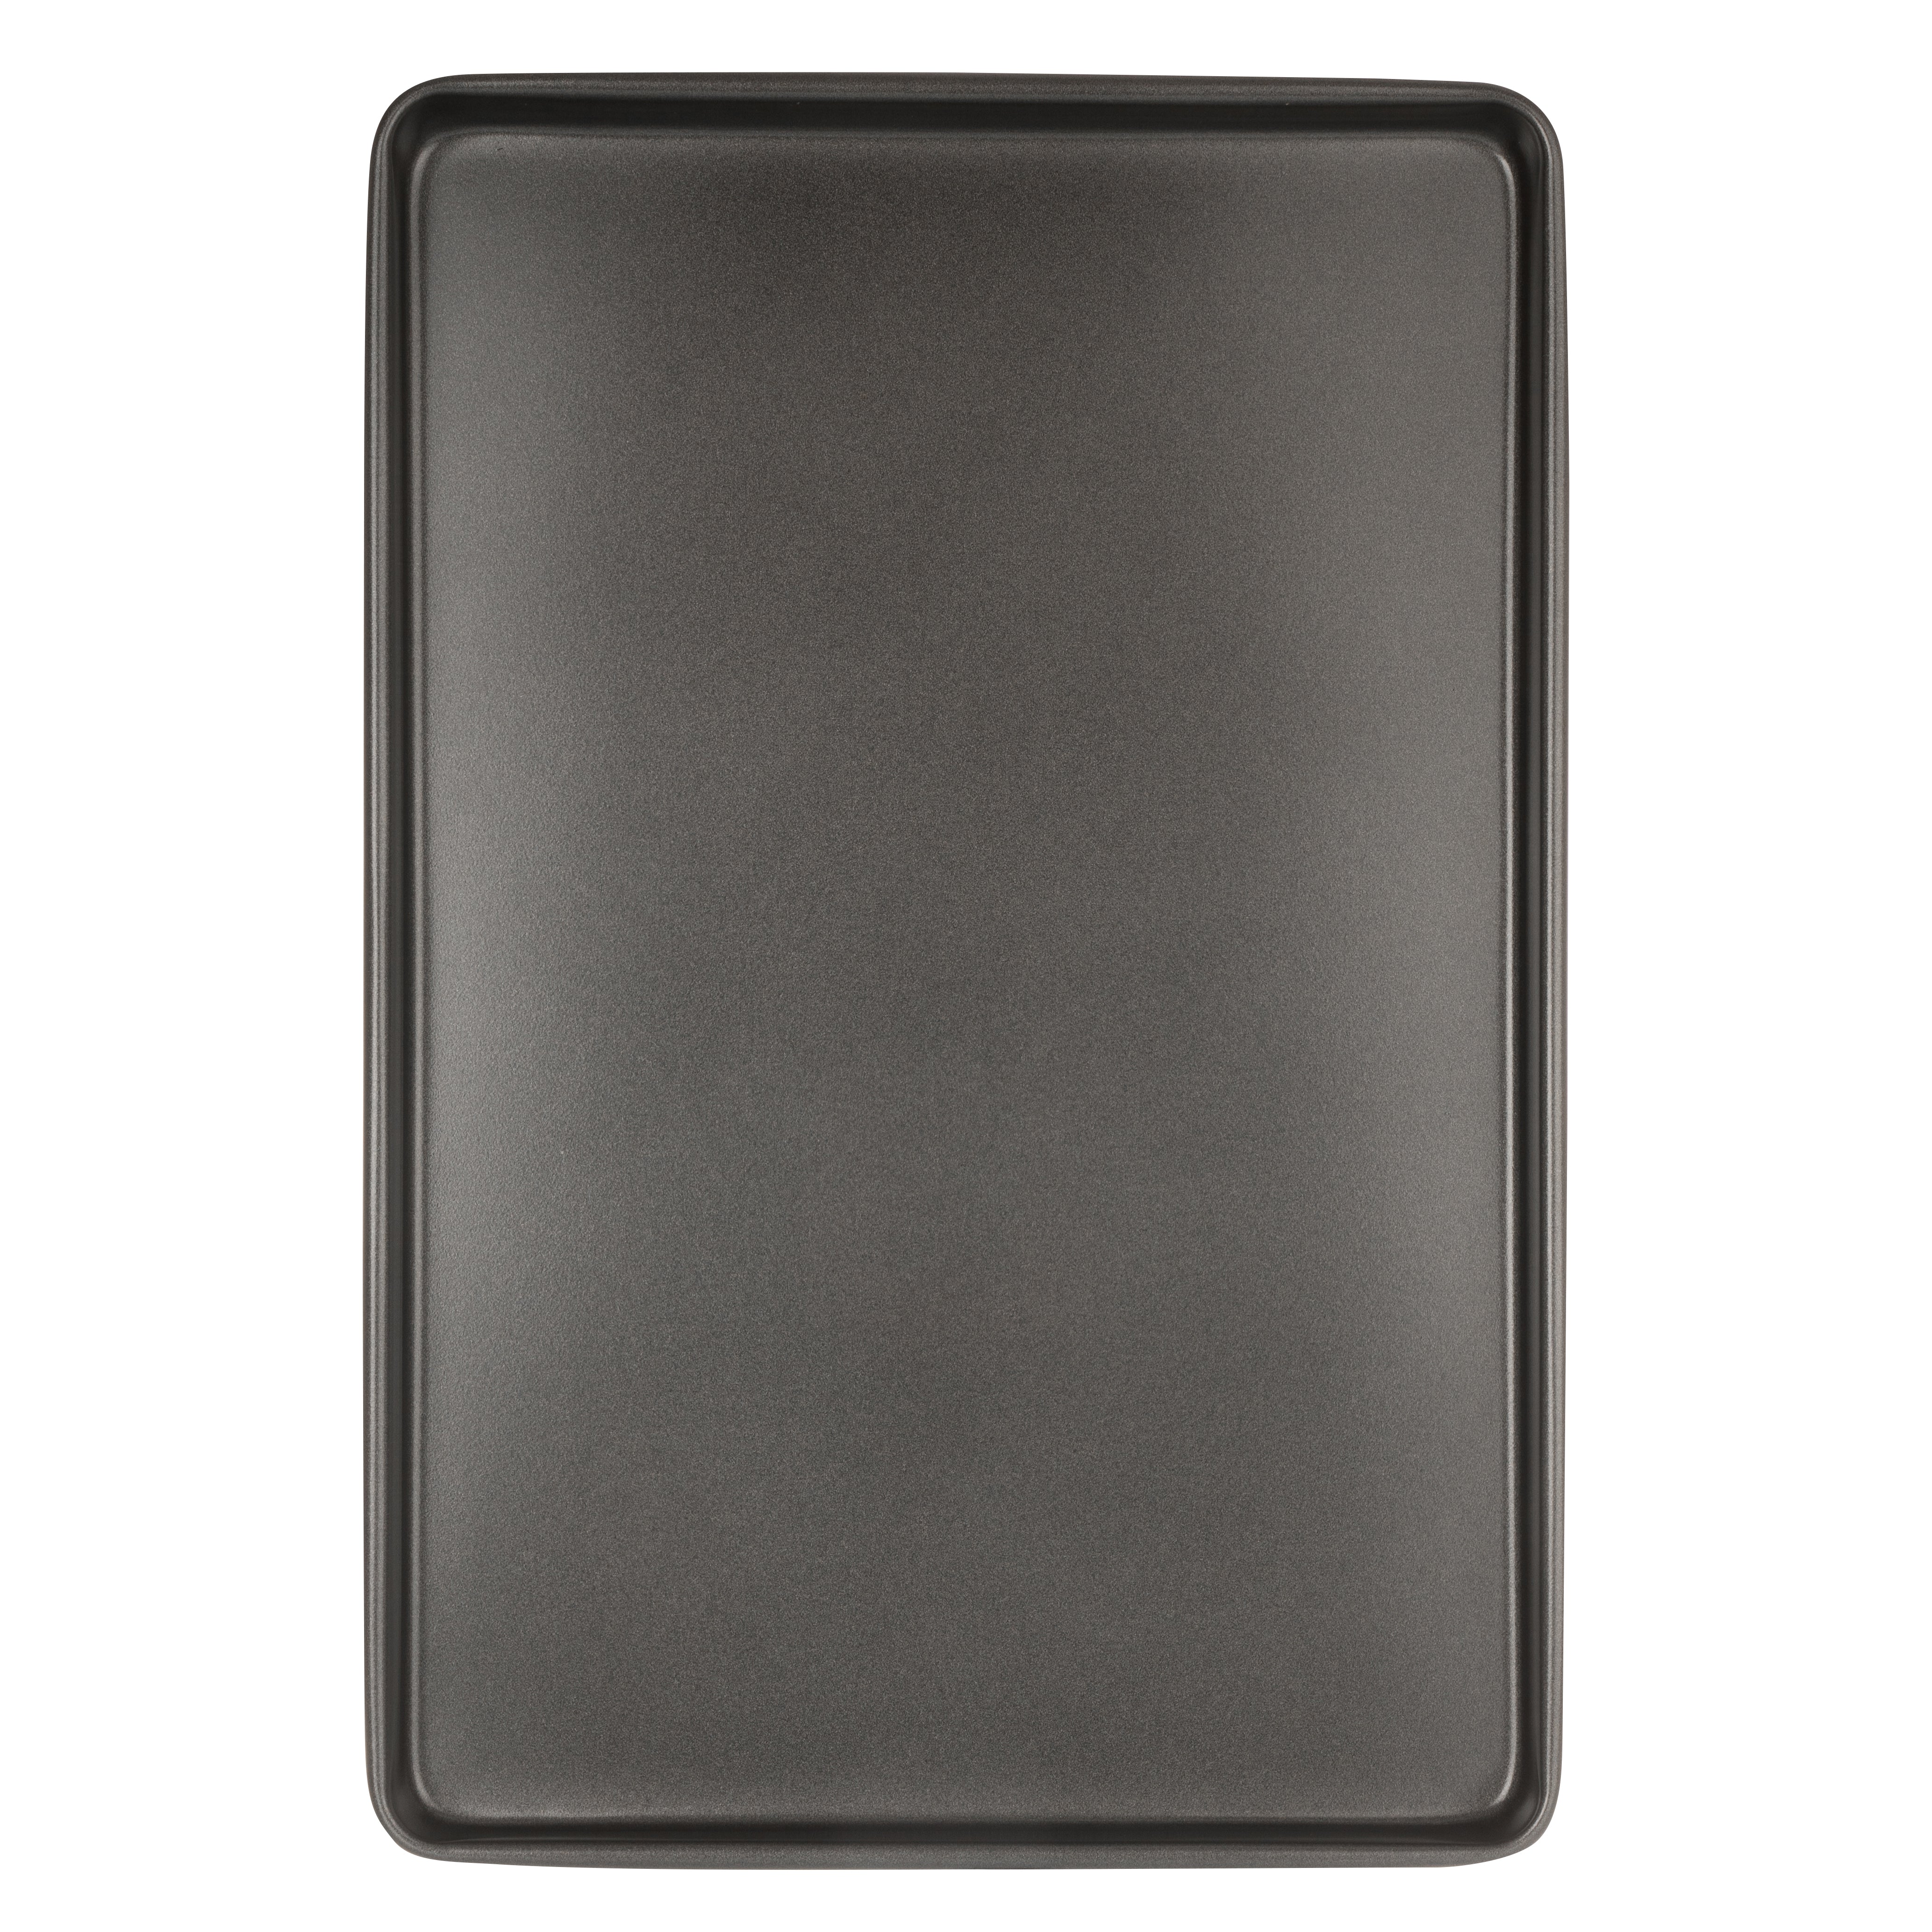 Luxe Kitchen Professional Quality Oven Baking Tray 44.5cm x 30cm x 2.5cm - The Cooks Cupboard Ltd